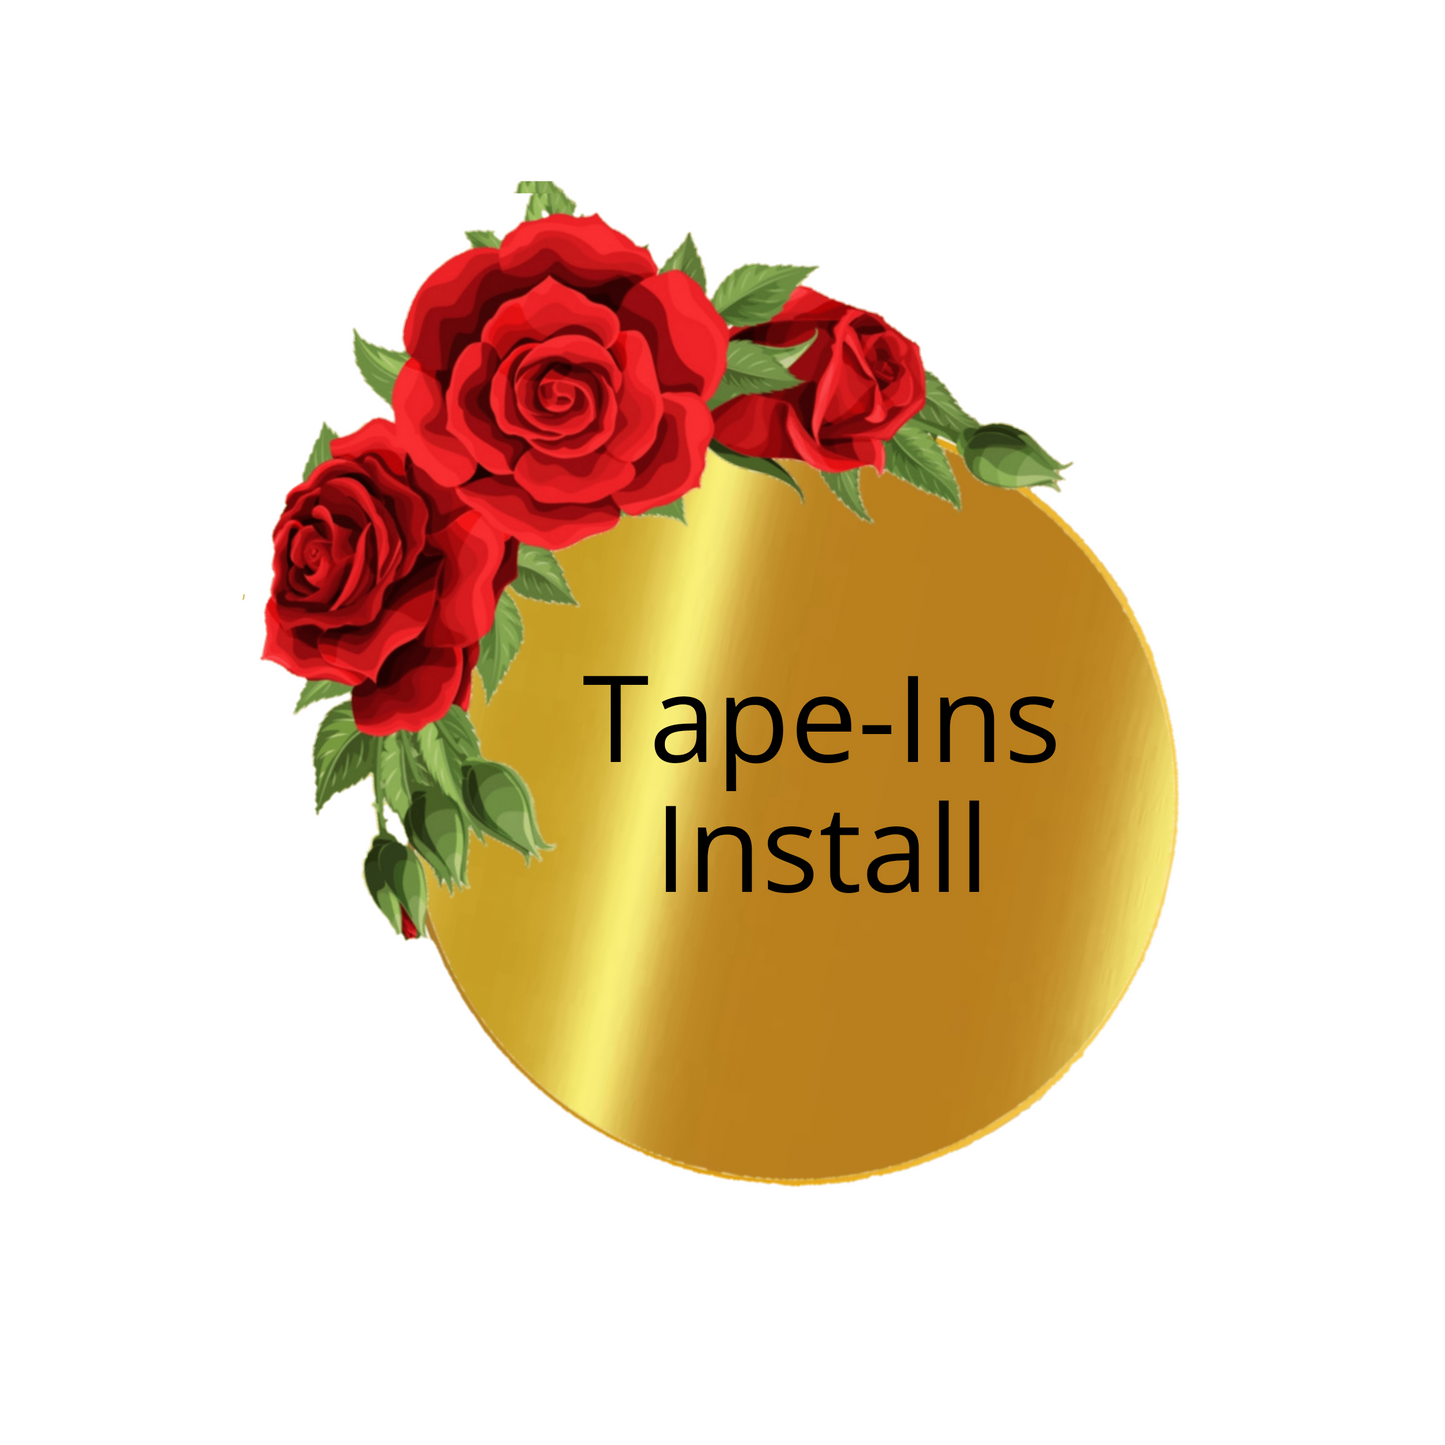 Tape-Ins Install